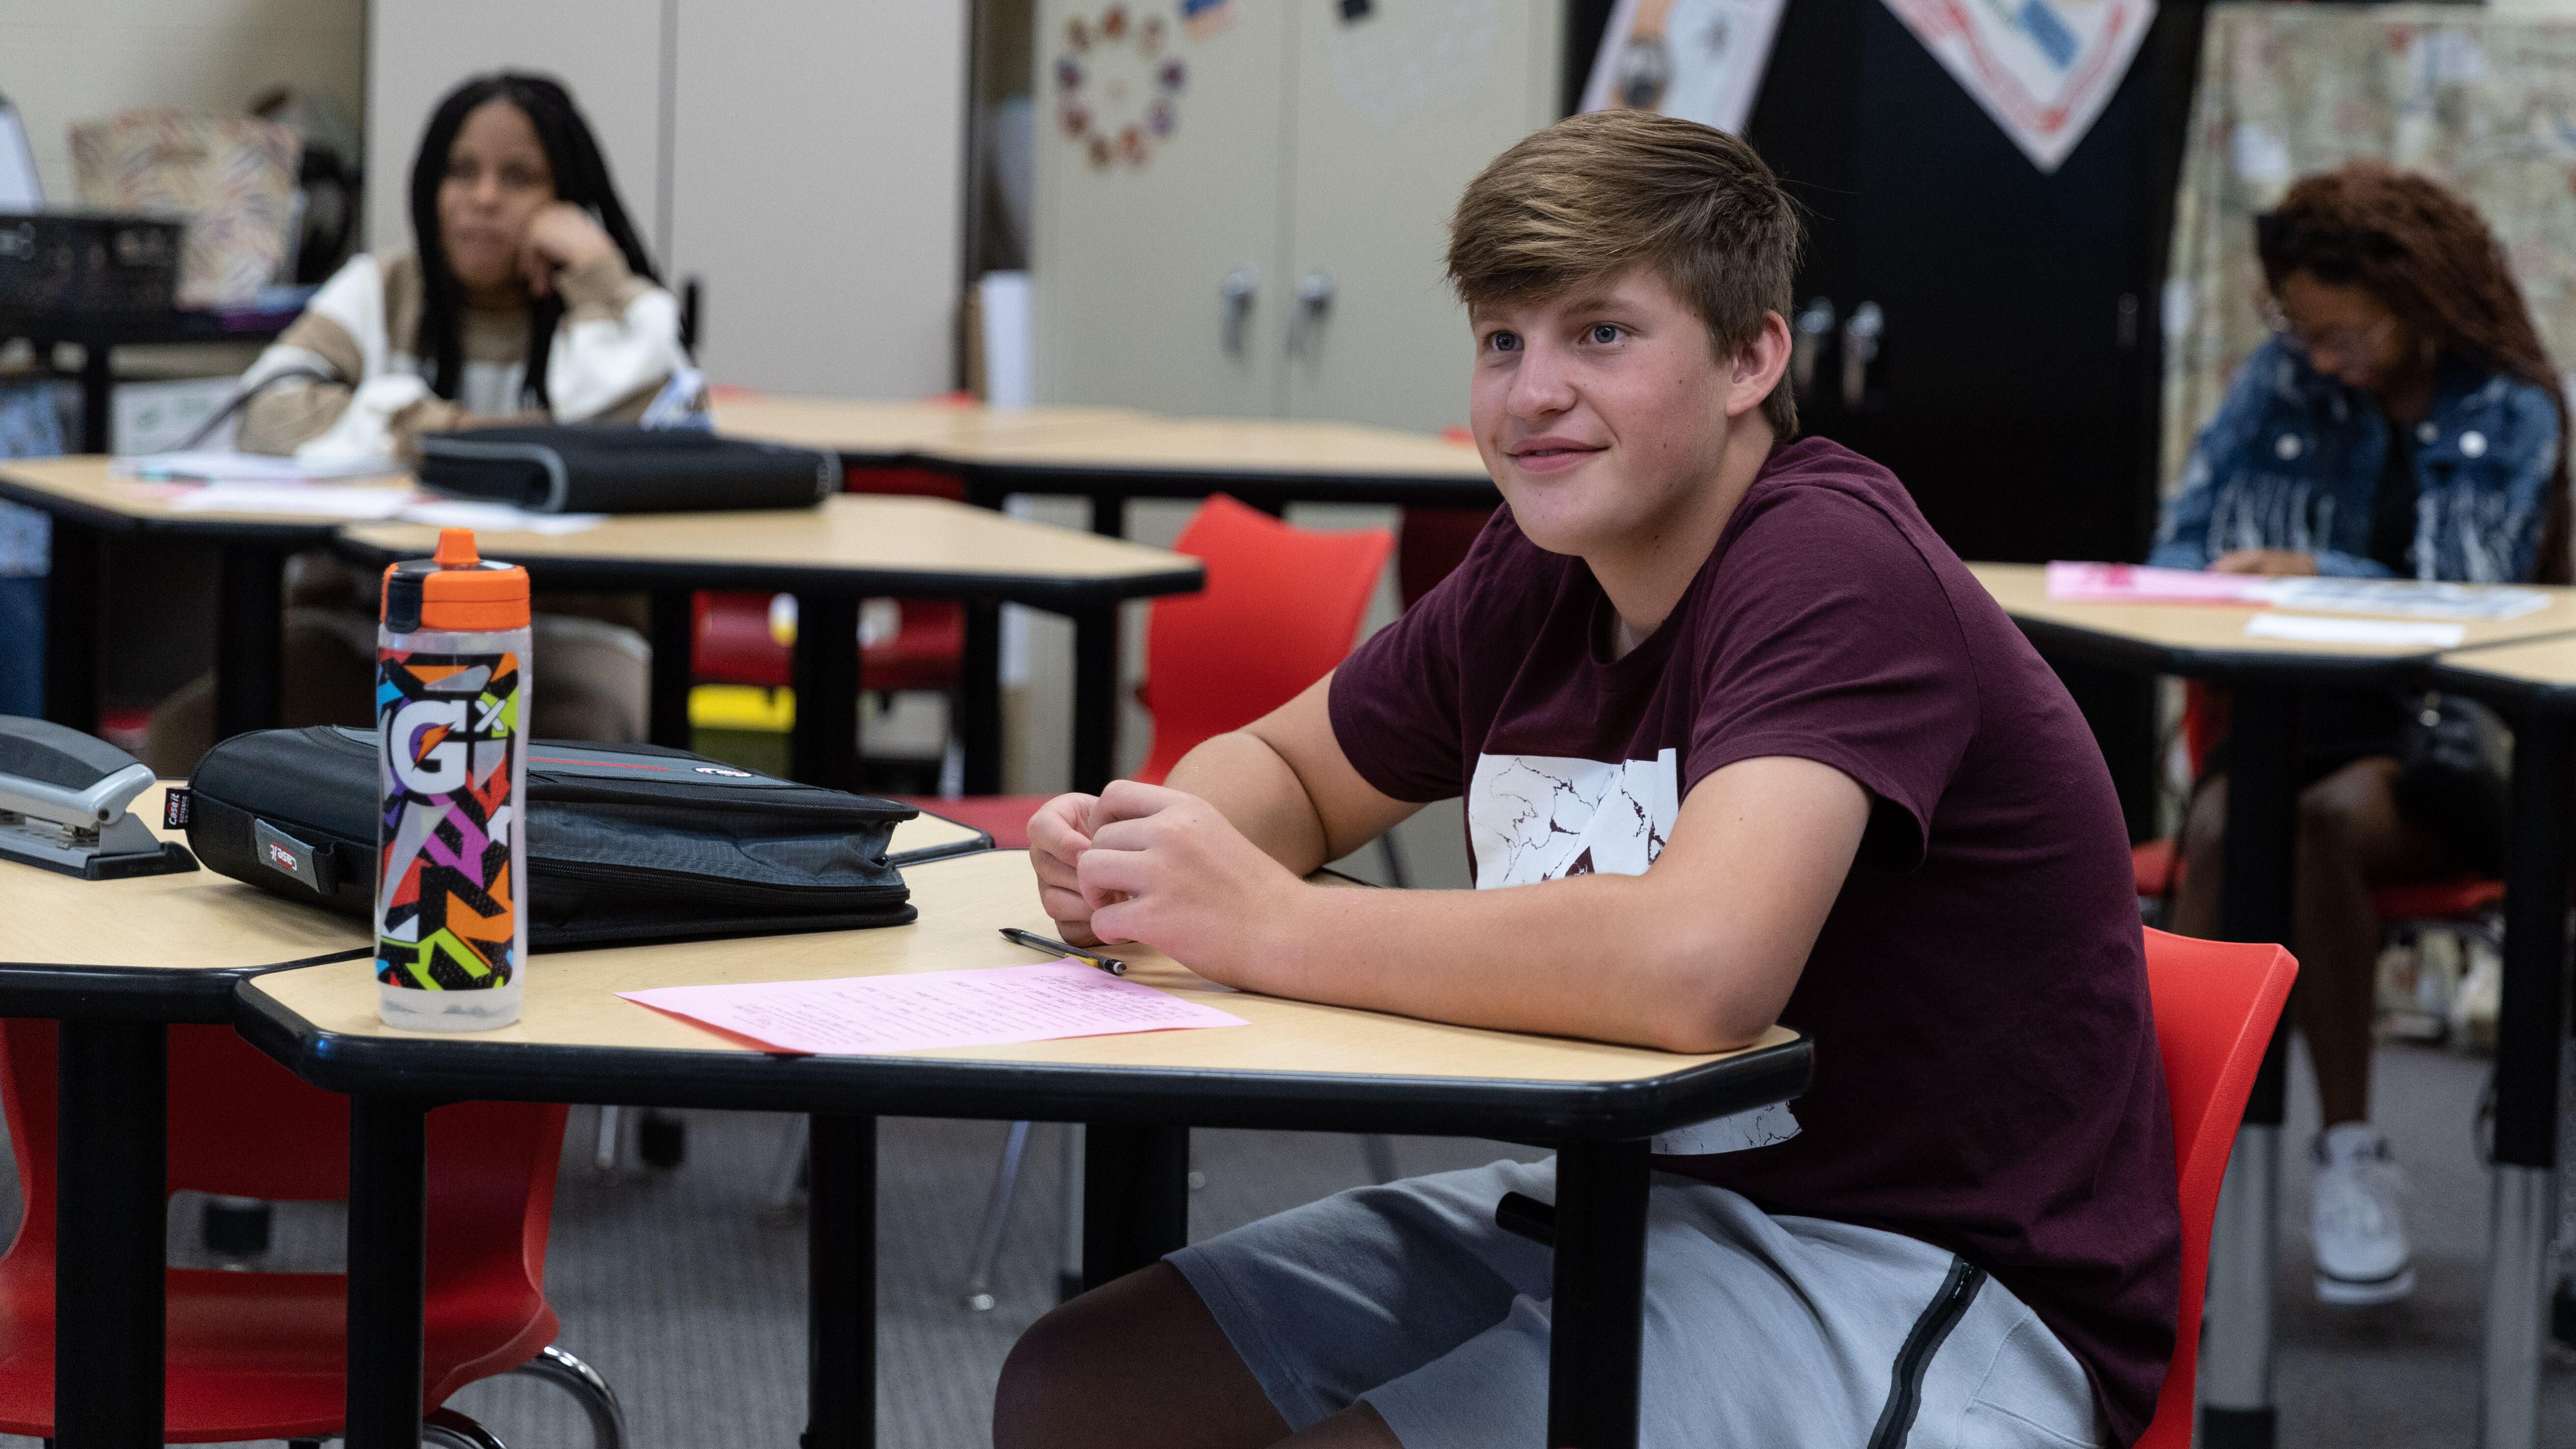 Middle school students laugh while seated in their desks